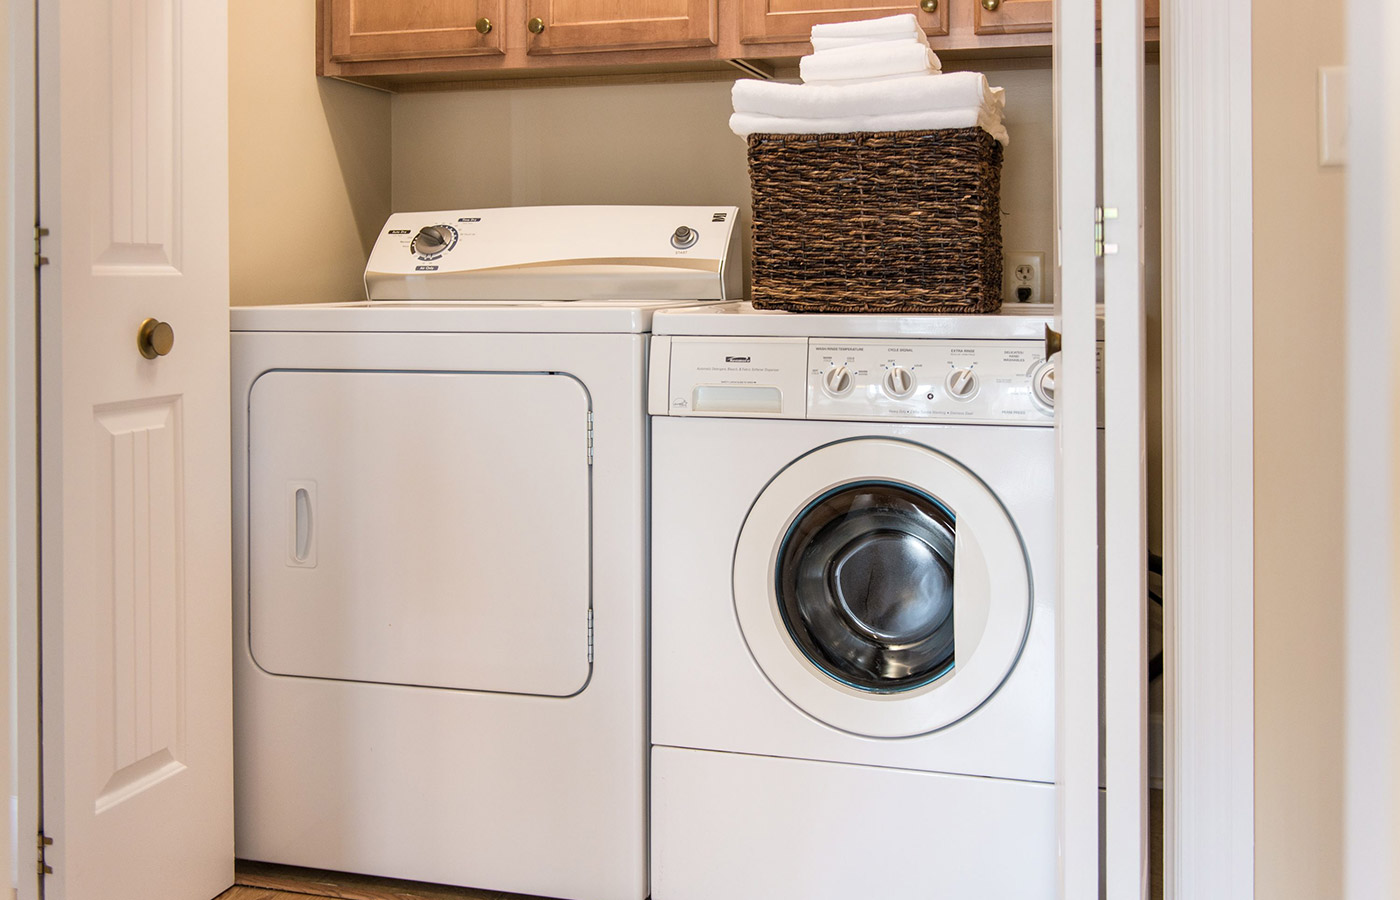 A washer and dryer.